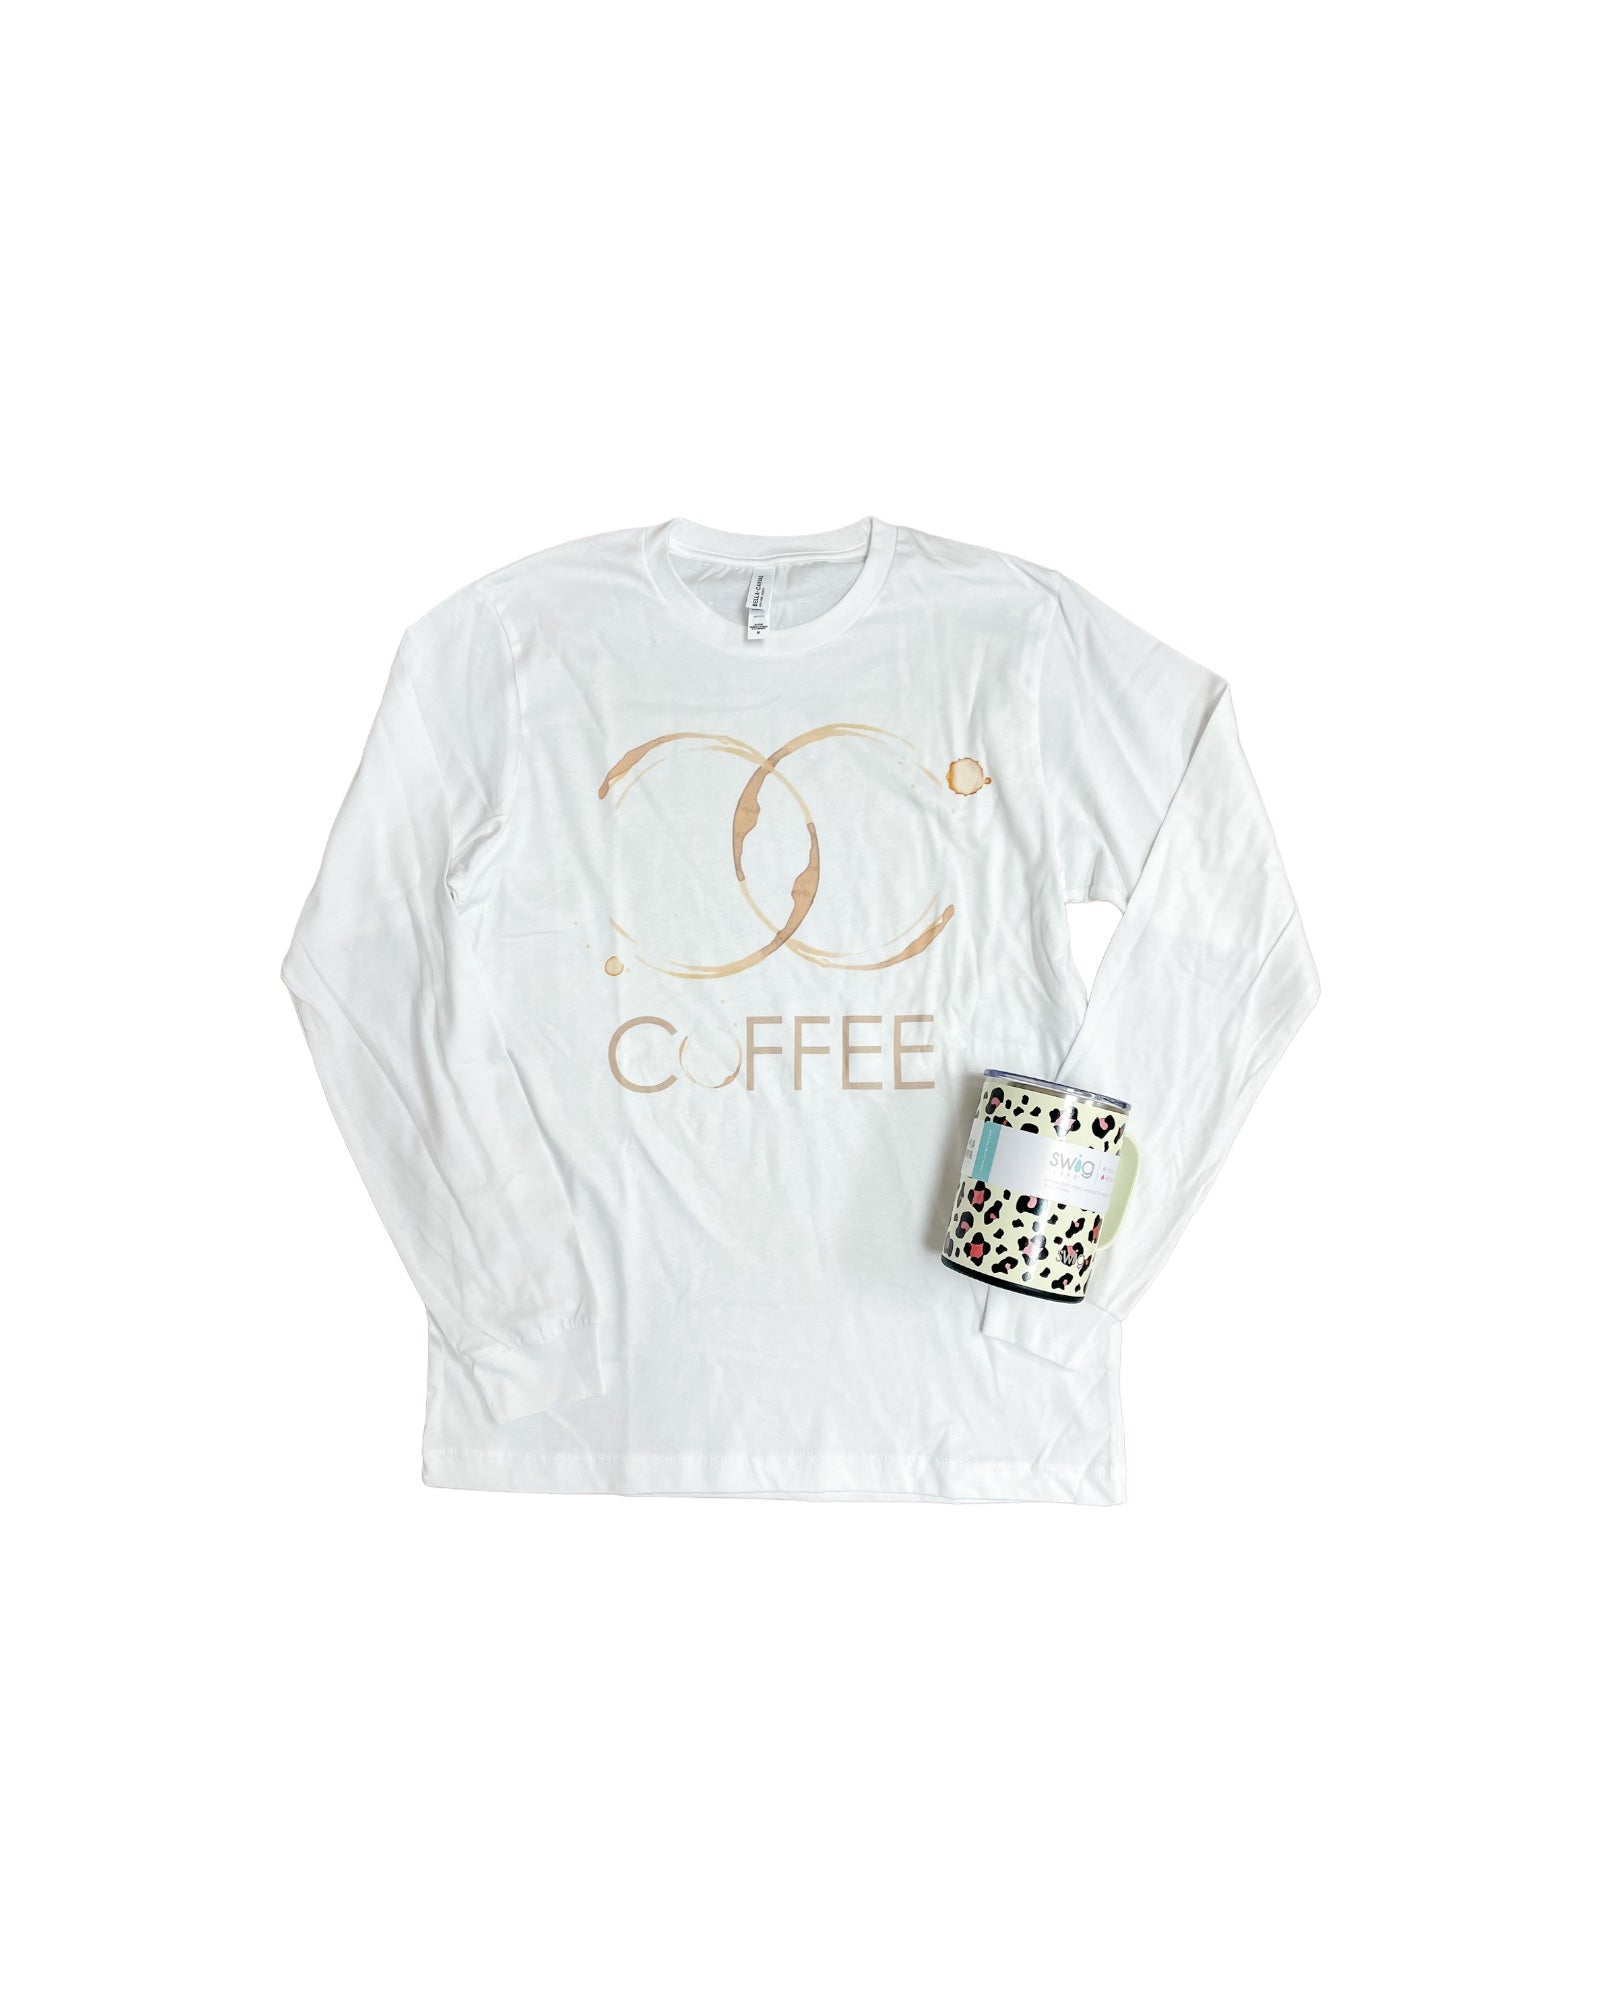 Ripped Wholesale Coffee Stain Tshirt, White XLarge